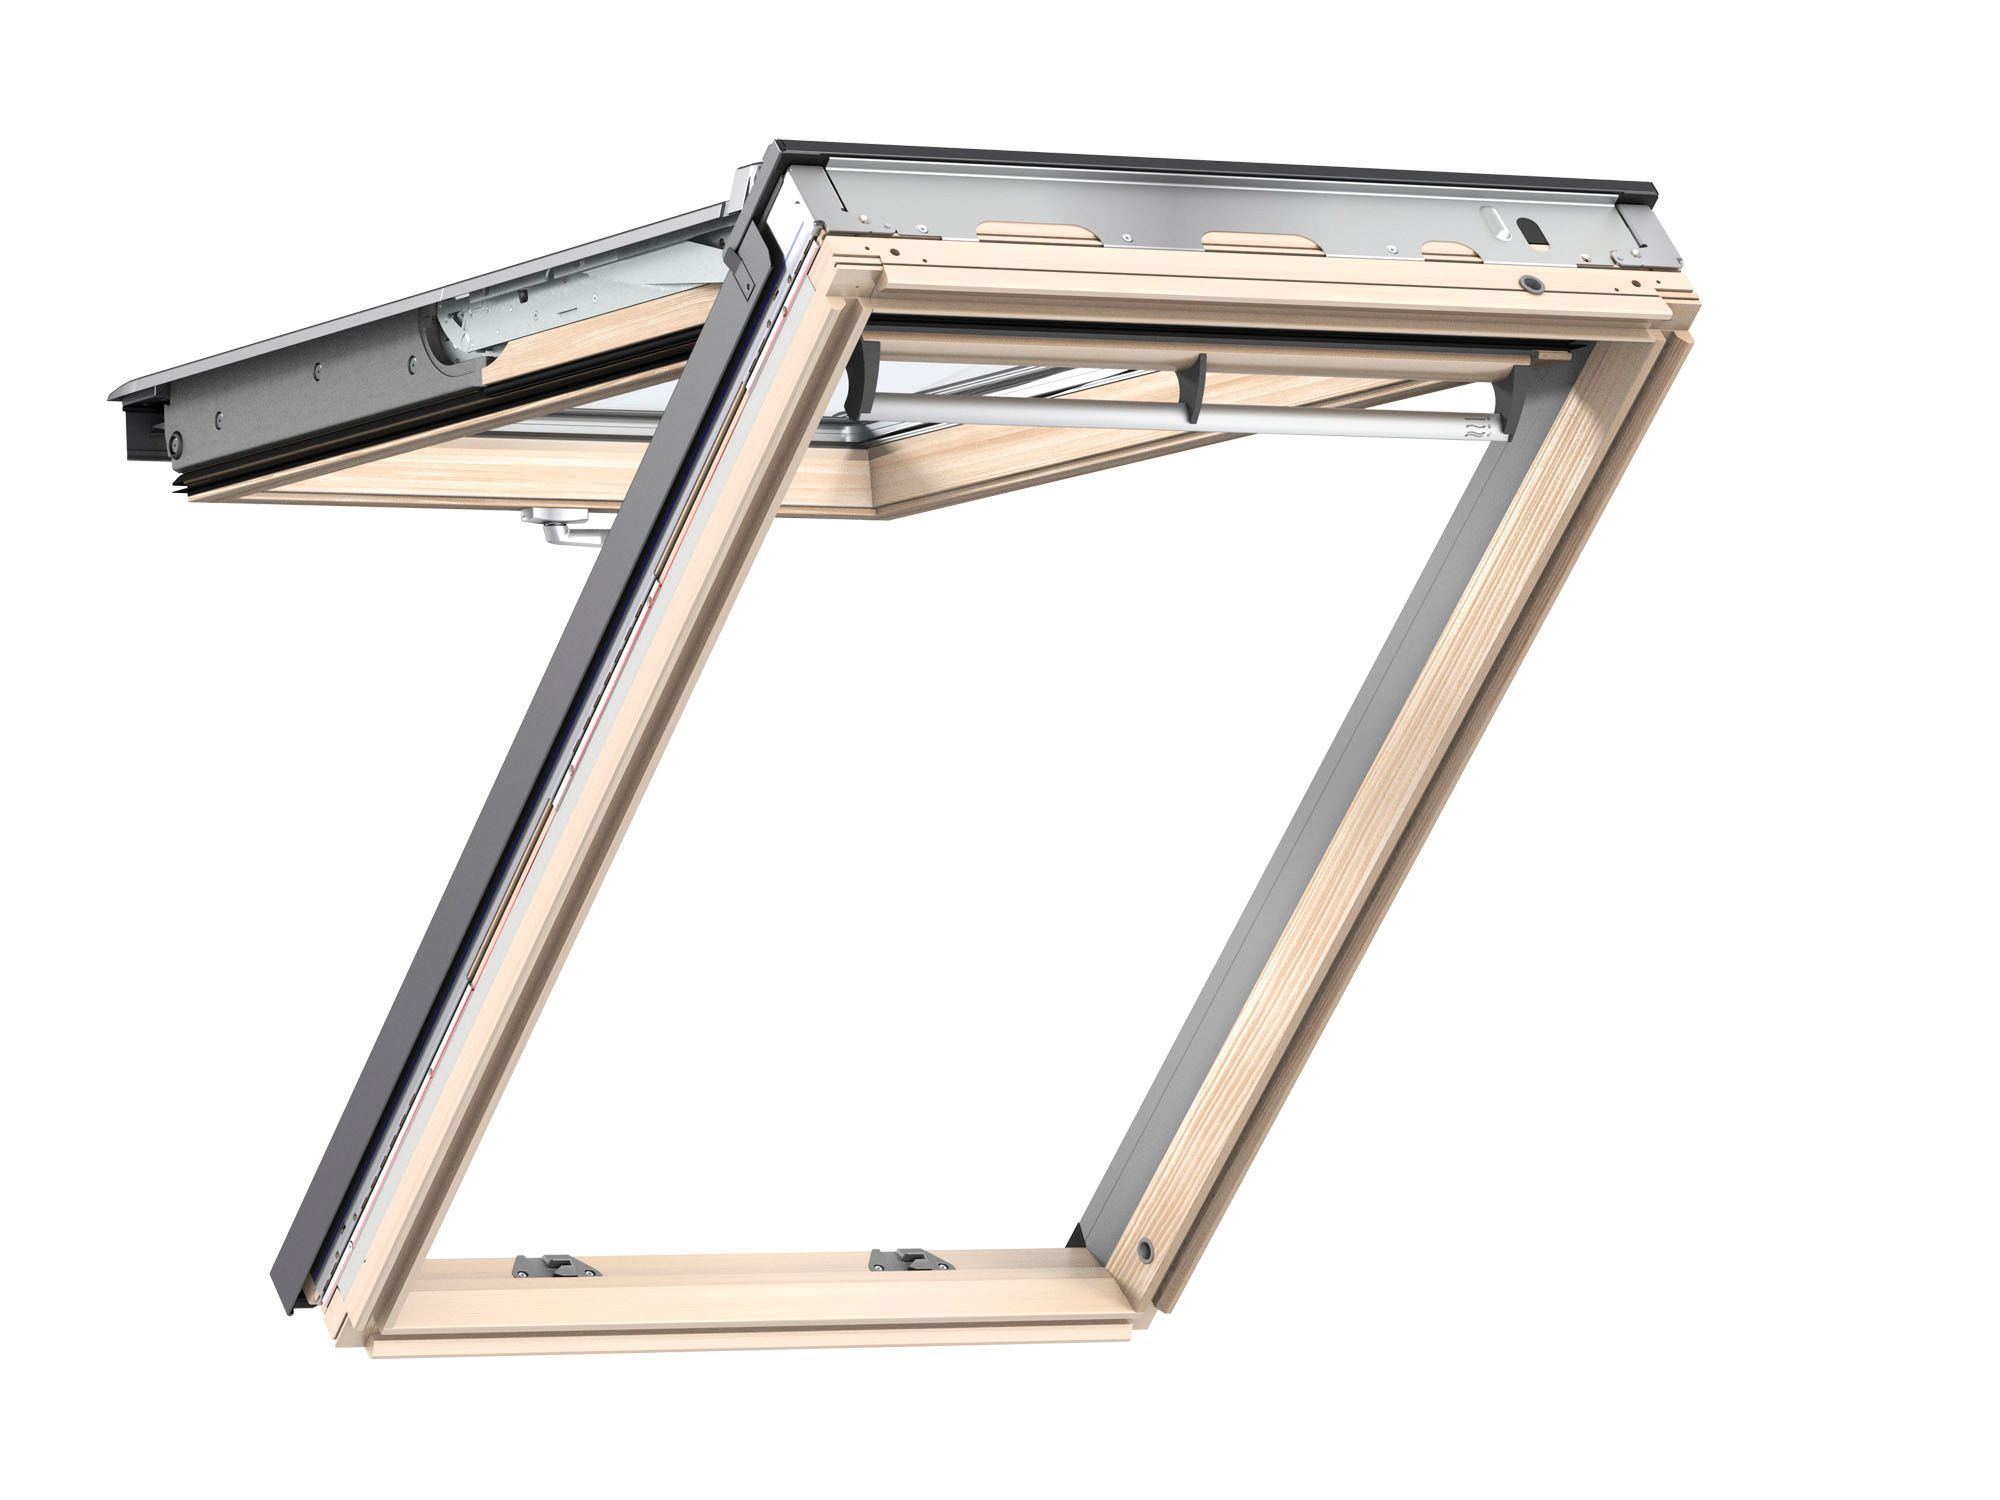 Image of VELUX Pine Top Hung Roof Window - GPL FK06 3070 - 660 x 1180mm